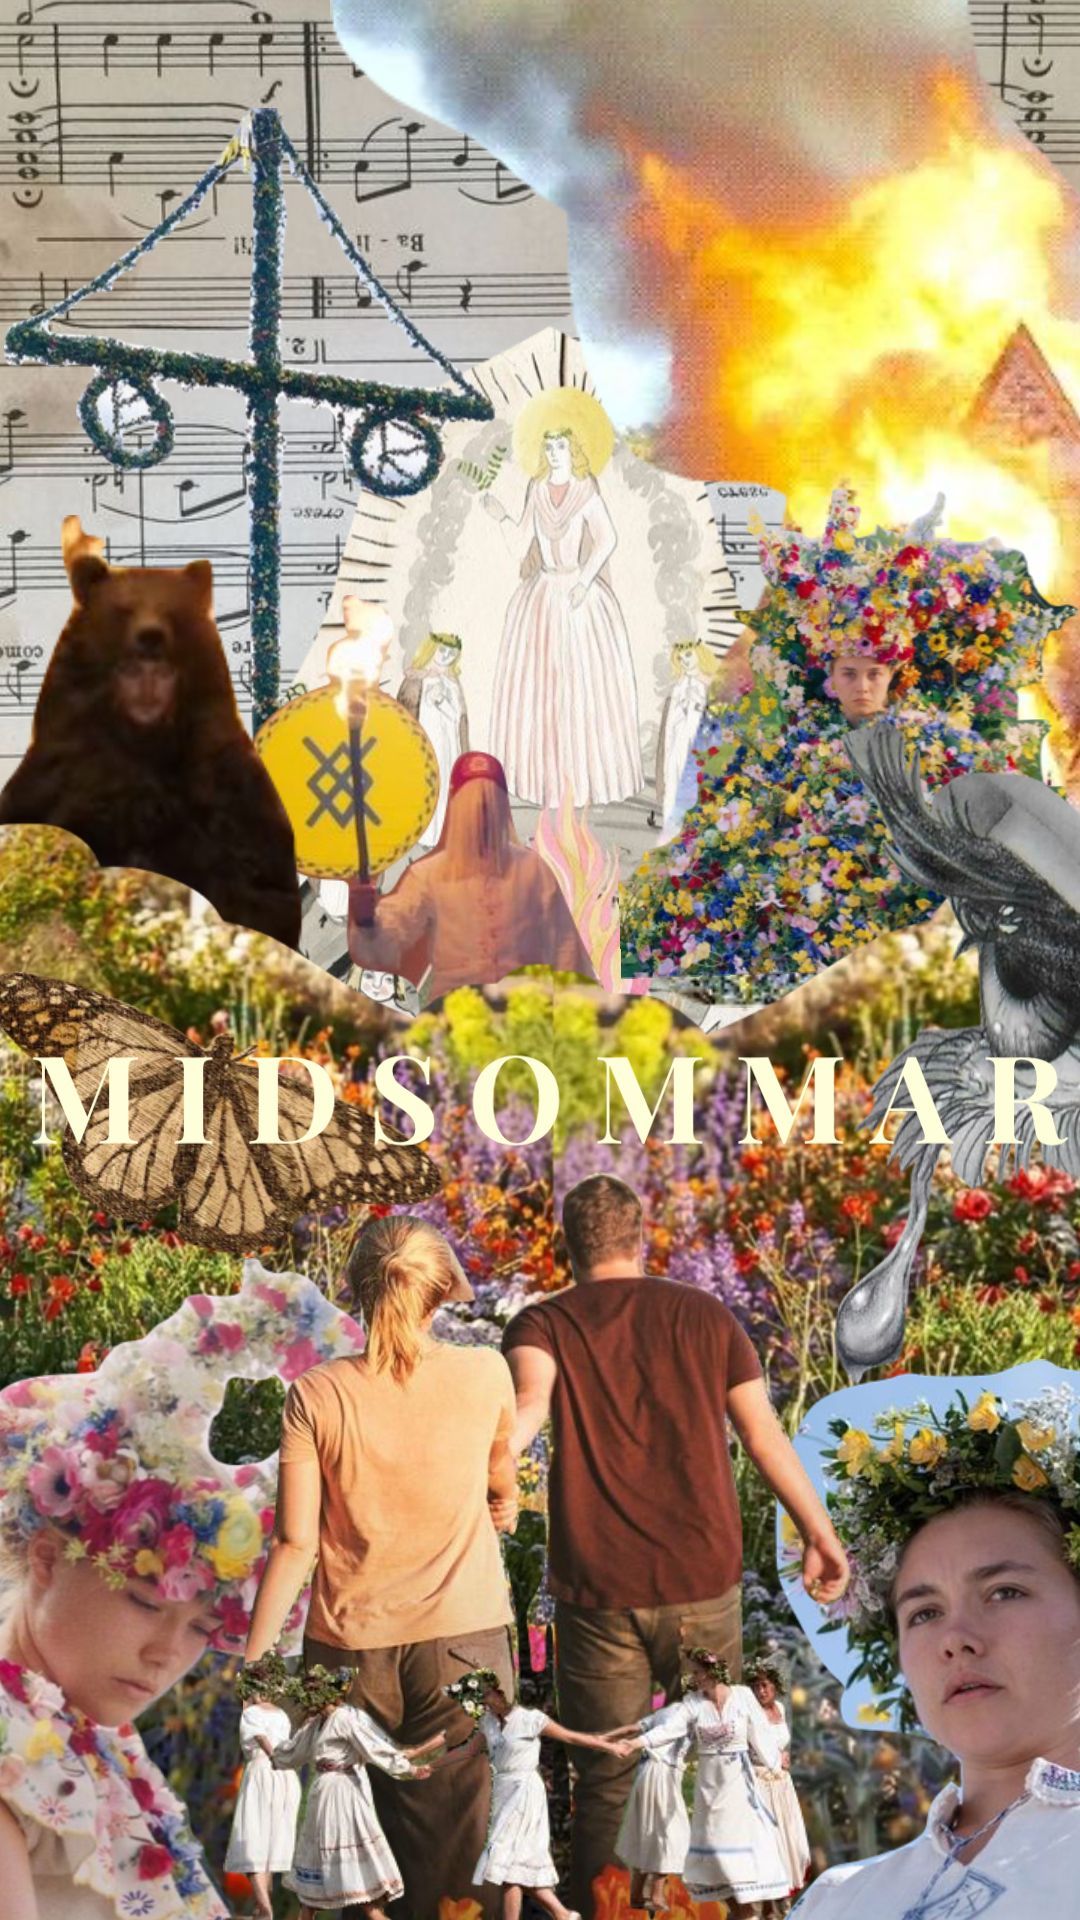 #collage #aesthetic #midsommar #a24 #florencepugh #aesthetic #moodboard. Mood board, Wallpaper, Collage